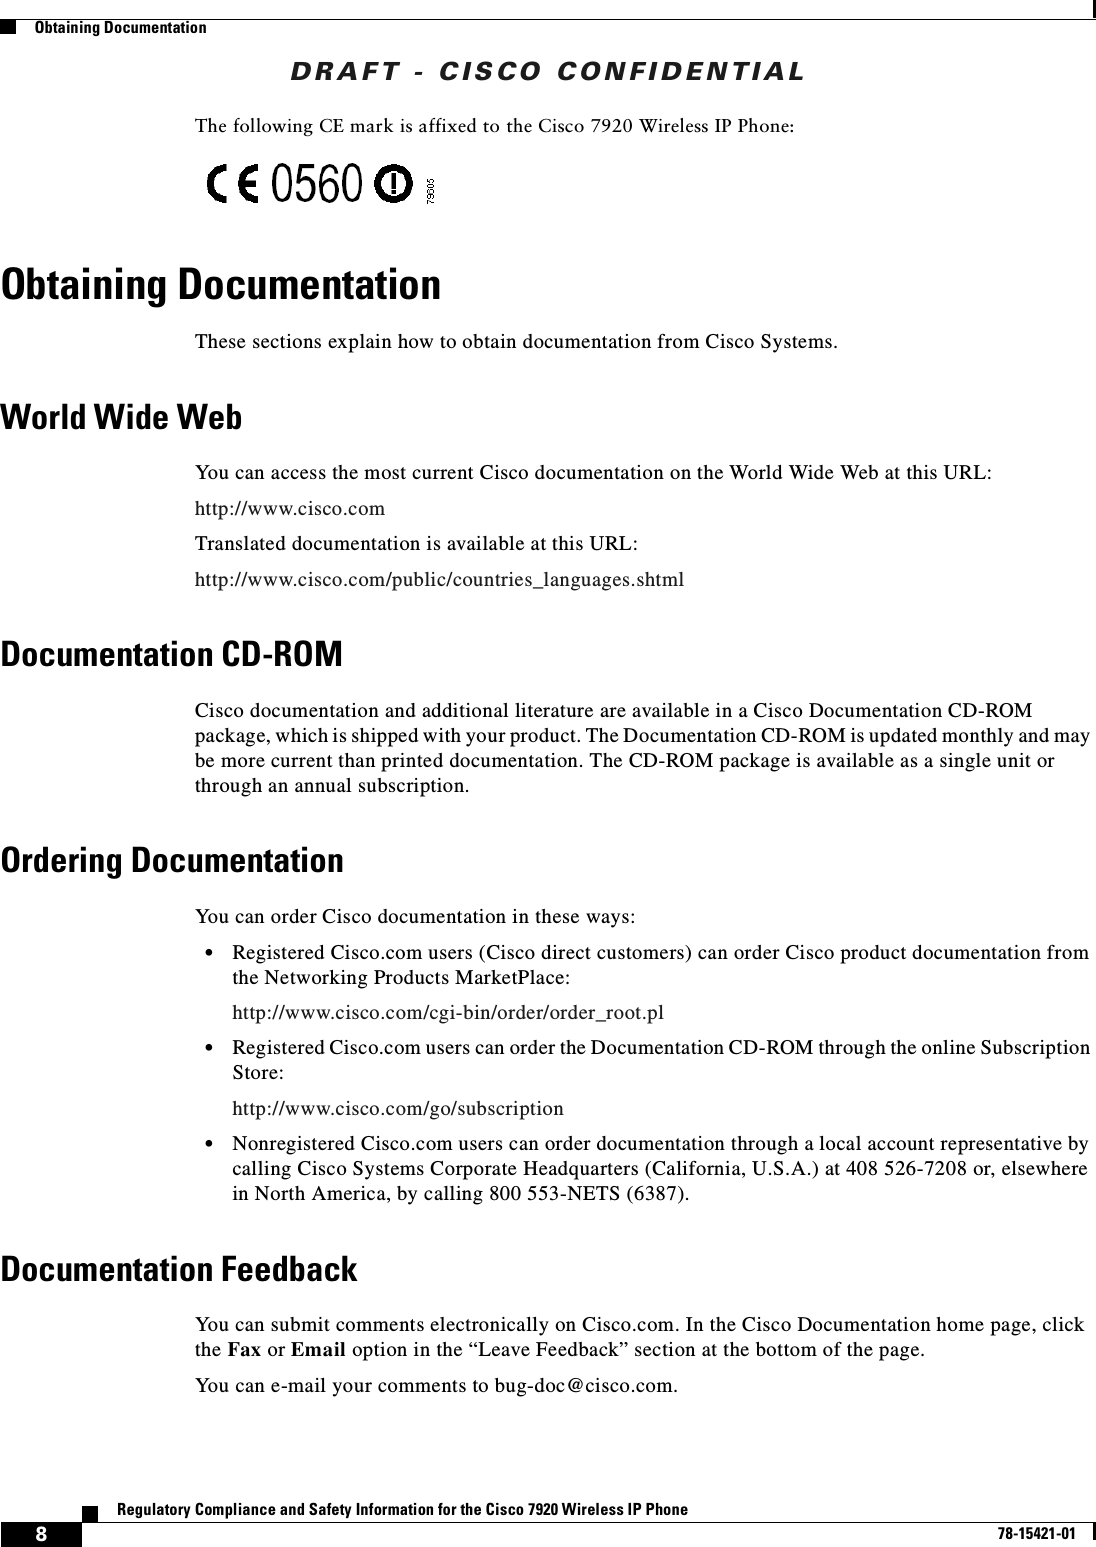 DRAFT - CISCO CONFIDENTIAL8Regulatory Compliance and Safety Information for the Cisco 7920 Wireless IP Phone78-15421-01Obtaining DocumentationThe following CE mark is affixed to the Cisco 7920 Wireless IP Phone:Obtaining DocumentationThese sections explain how to obtain documentation from Cisco Systems.World Wide WebYou can access the most current Cisco documentation on the World Wide Web at this URL:http://www.cisco.comTranslated documentation is available at this URL:http://www.cisco.com/public/countries_languages.shtmlDocumentation CD-ROMCisco documentation and additional literature are available in a Cisco Documentation CD-ROM package, which is shipped with your product. The Documentation CD-ROM is updated monthly and may be more current than printed documentation. The CD-ROM package is available as a single unit or through an annual subscription.Ordering DocumentationYou can order Cisco documentation in these ways:•Registered Cisco.com users (Cisco direct customers) can order Cisco product documentation from the Networking Products MarketPlace:http://www.cisco.com/cgi-bin/order/order_root.pl•Registered Cisco.com users can order the Documentation CD-ROM through the online Subscription Store:http://www.cisco.com/go/subscription•Nonregistered Cisco.com users can order documentation through a local account representative by calling Cisco Systems Corporate Headquarters (California, U.S.A.) at 408 526-7208 or, elsewhere in North America, by calling 800 553-NETS (6387). Documentation FeedbackYou can submit comments electronically on Cisco.com. In the Cisco Documentation home page, click the Fax or Email option in the “Leave Feedback” section at the bottom of the page. You can e-mail your comments to bug-doc@cisco.com.